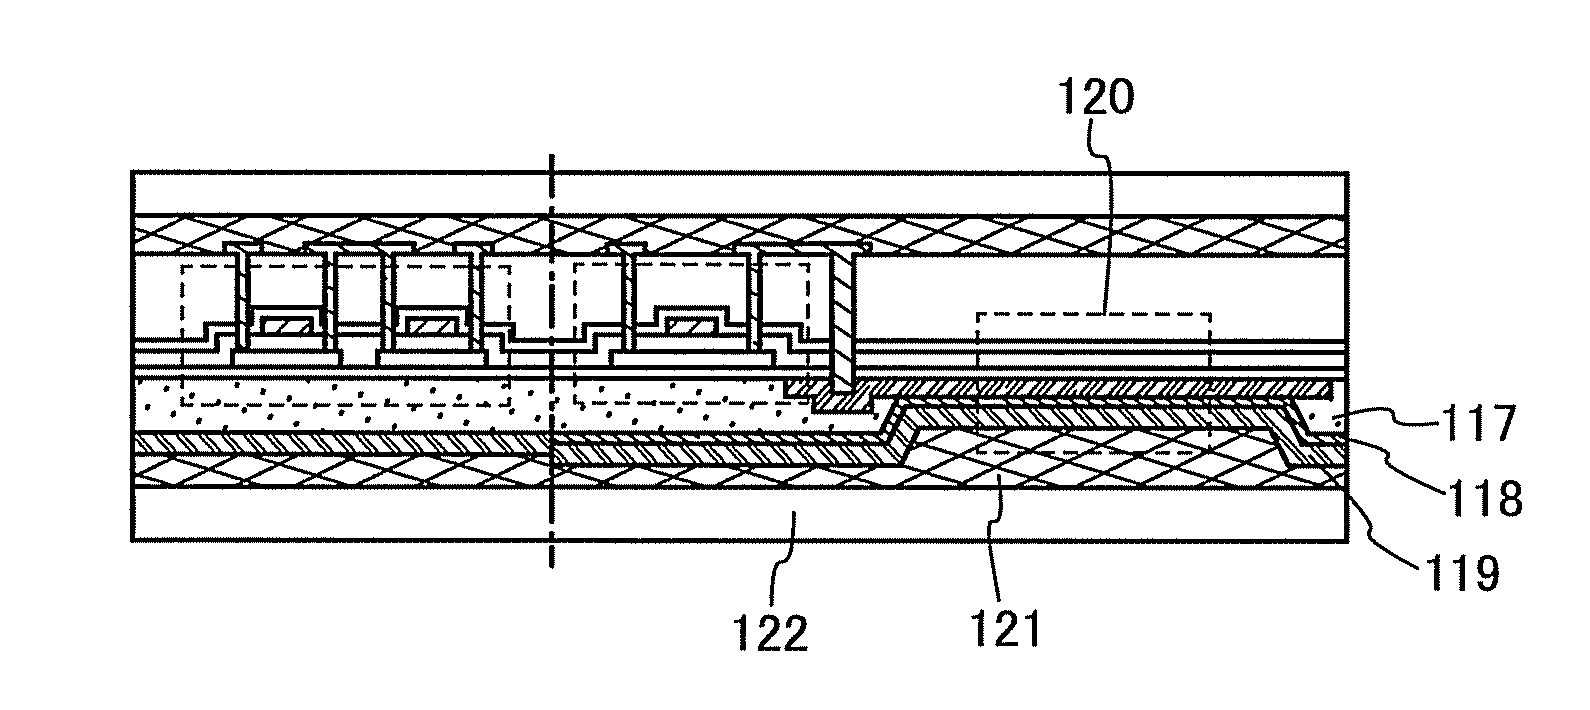 Flexible light-emitting device, and method for fabricating the same